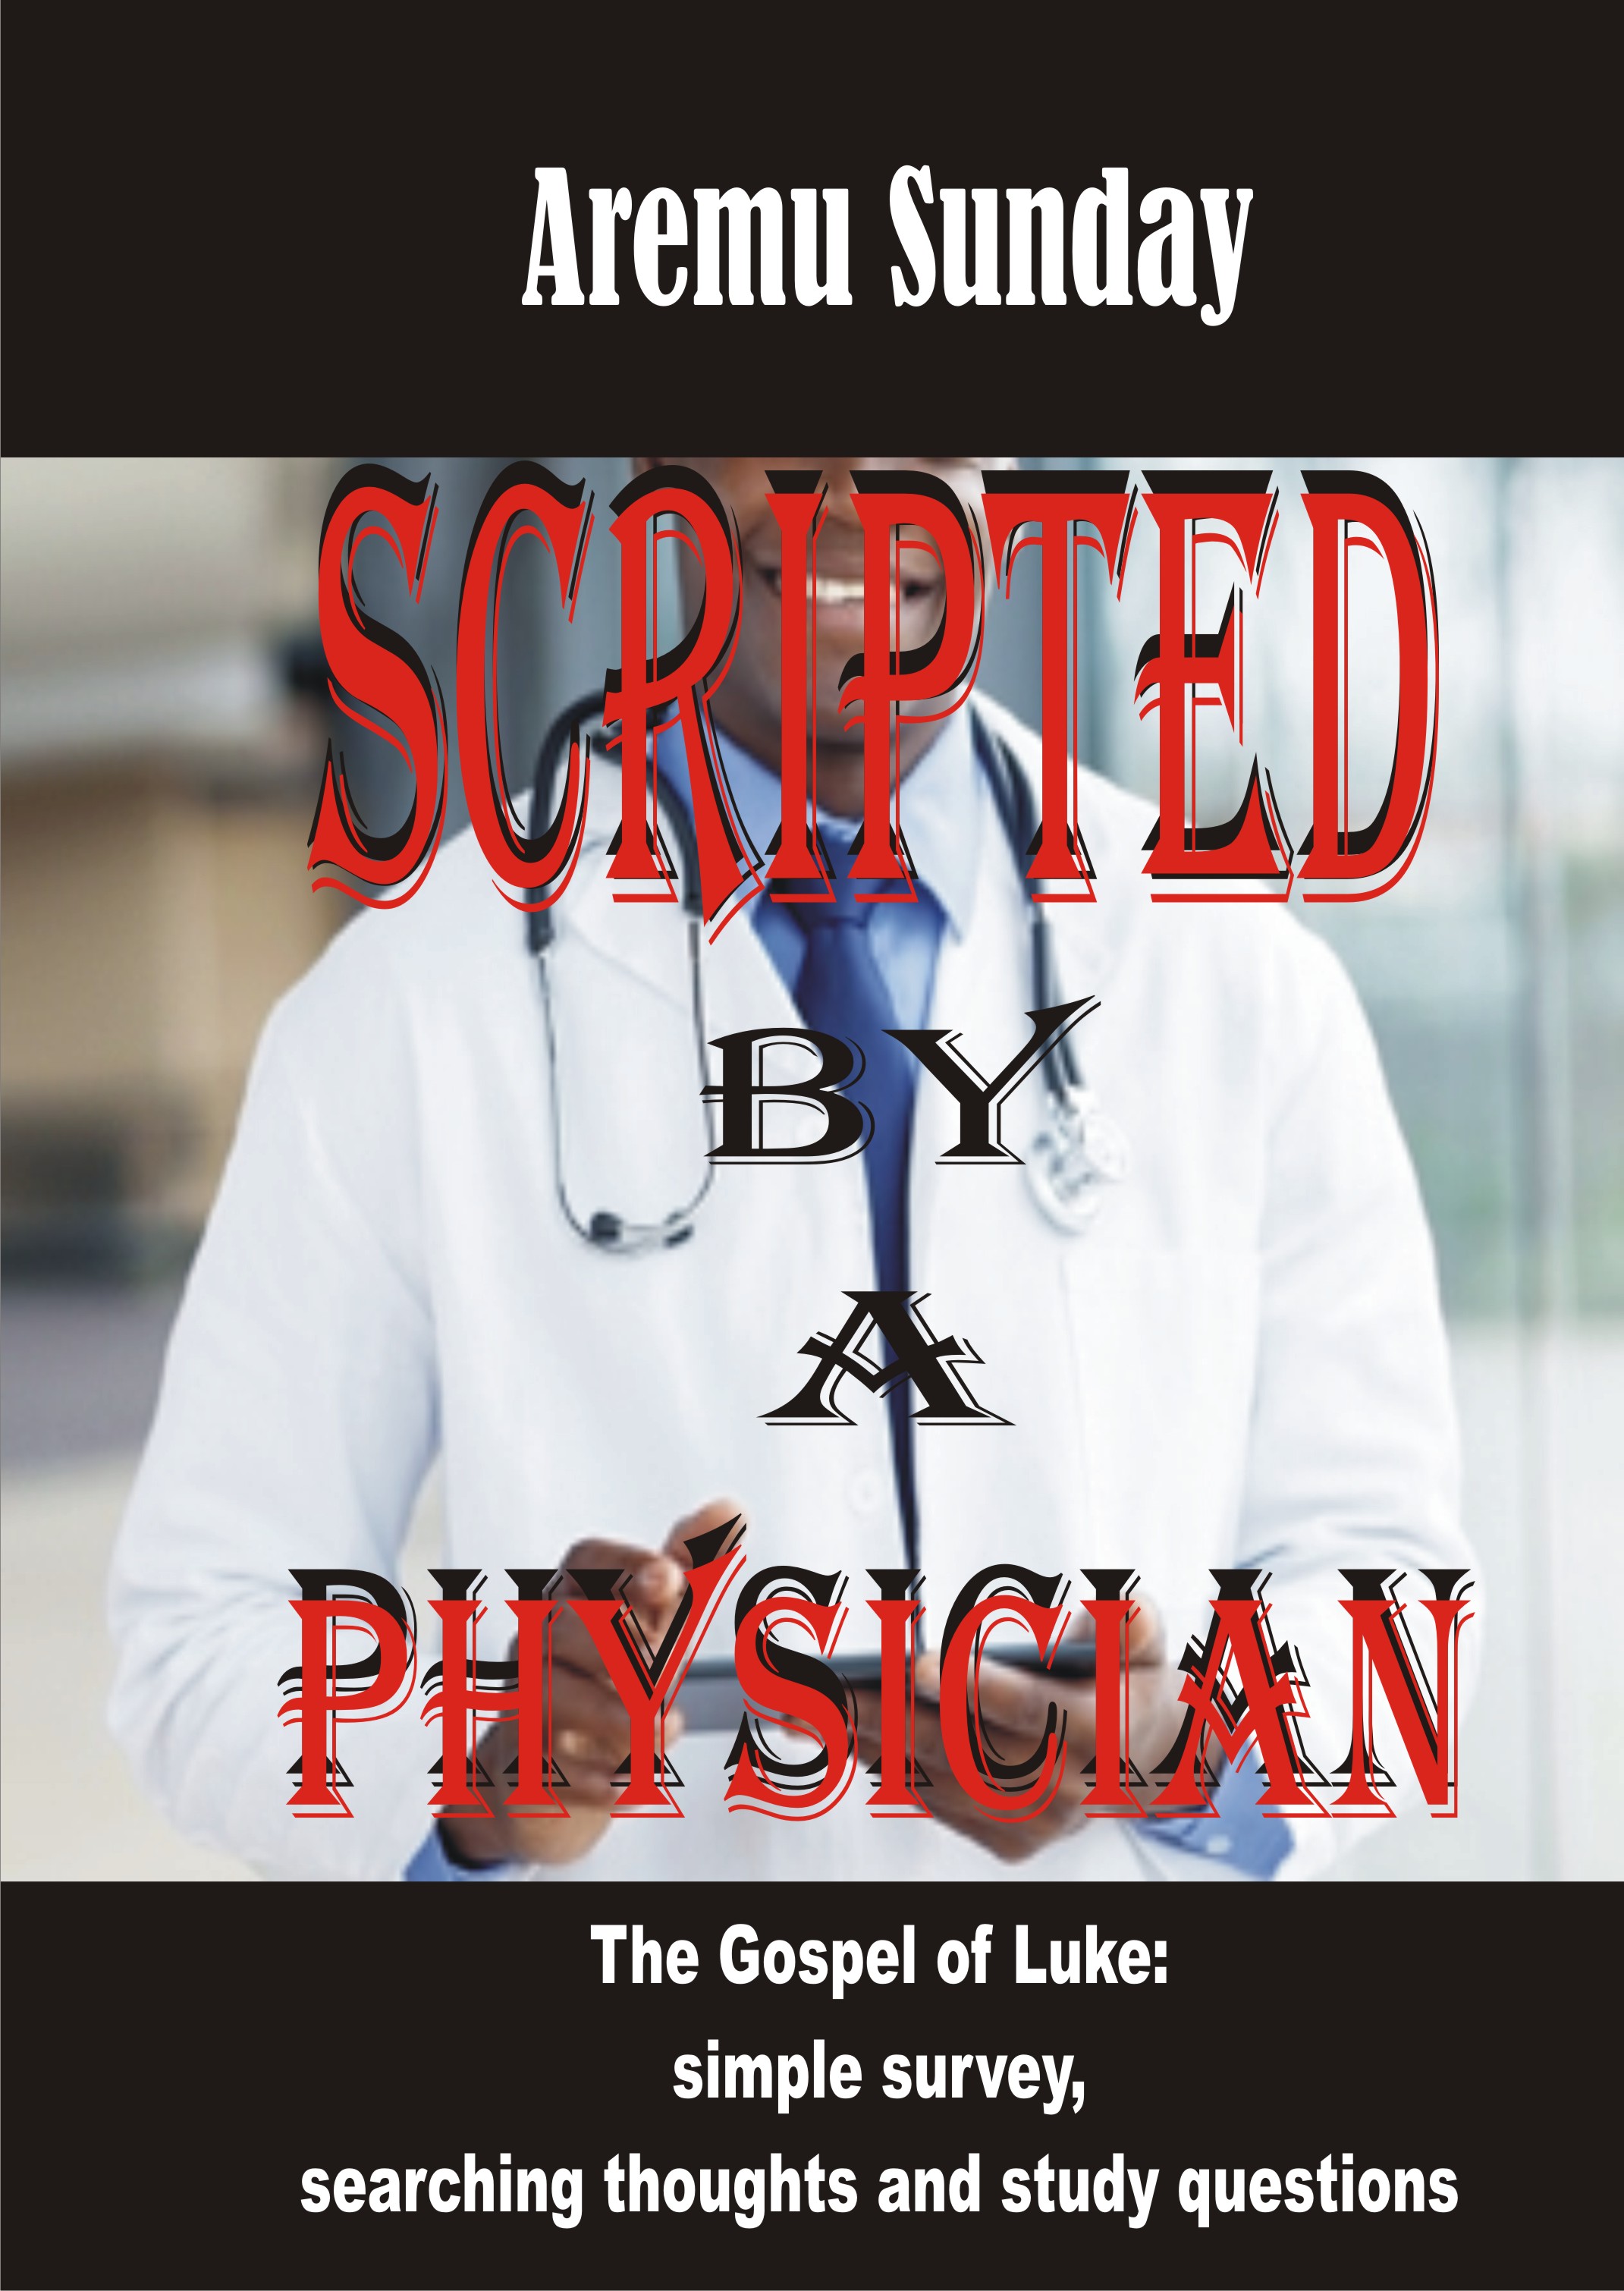 Scripted-by-a-Physician